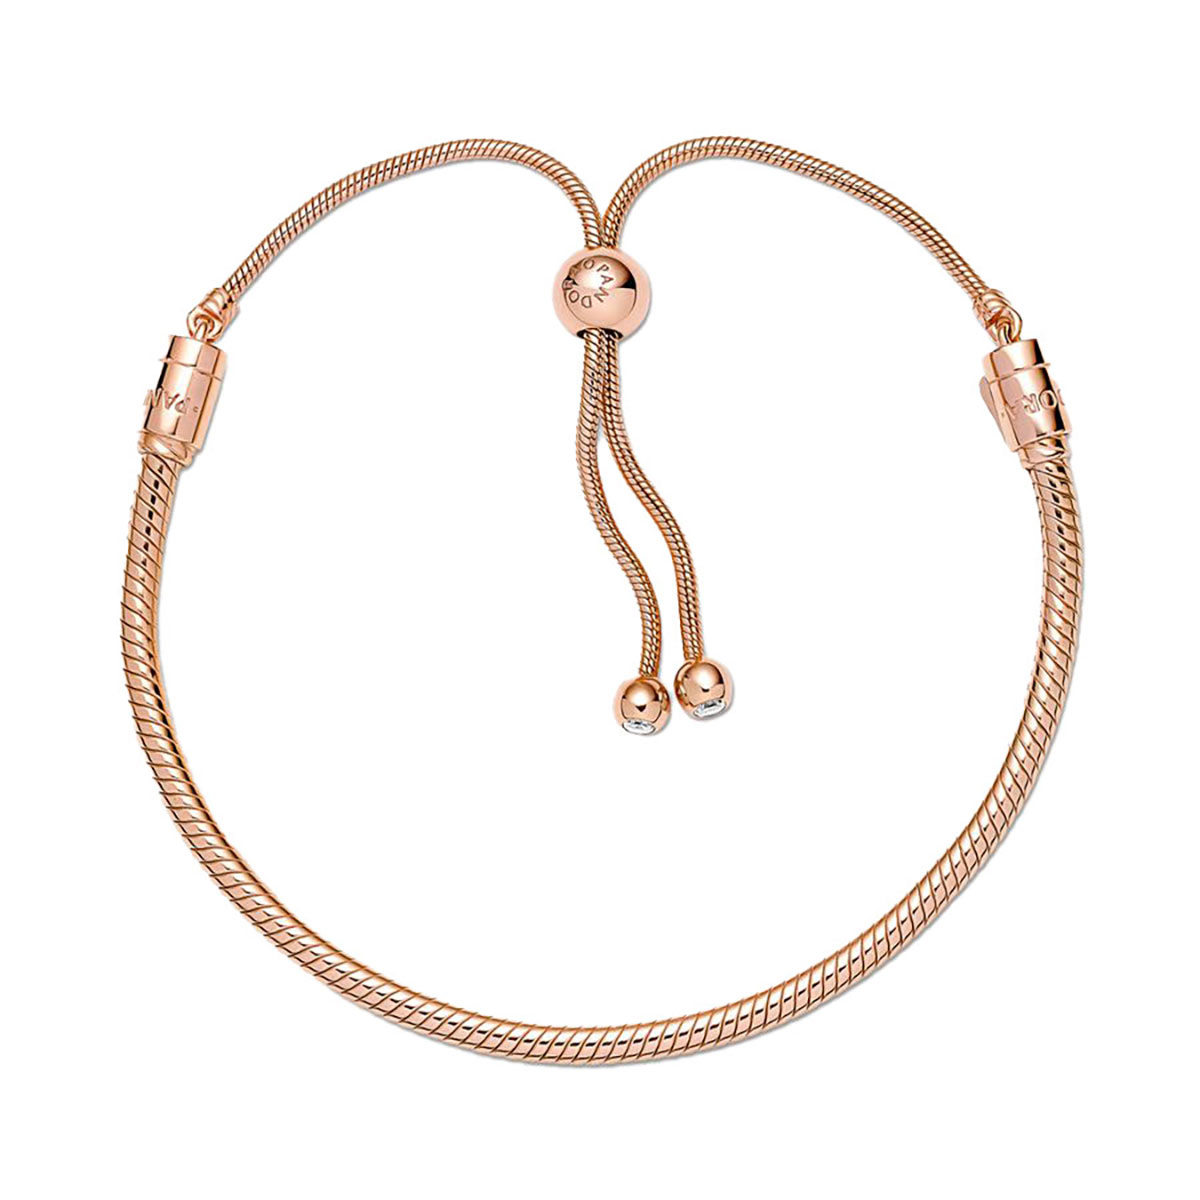 Snake chain 14k rose gold-plated bracelet with clear cubic zirconia